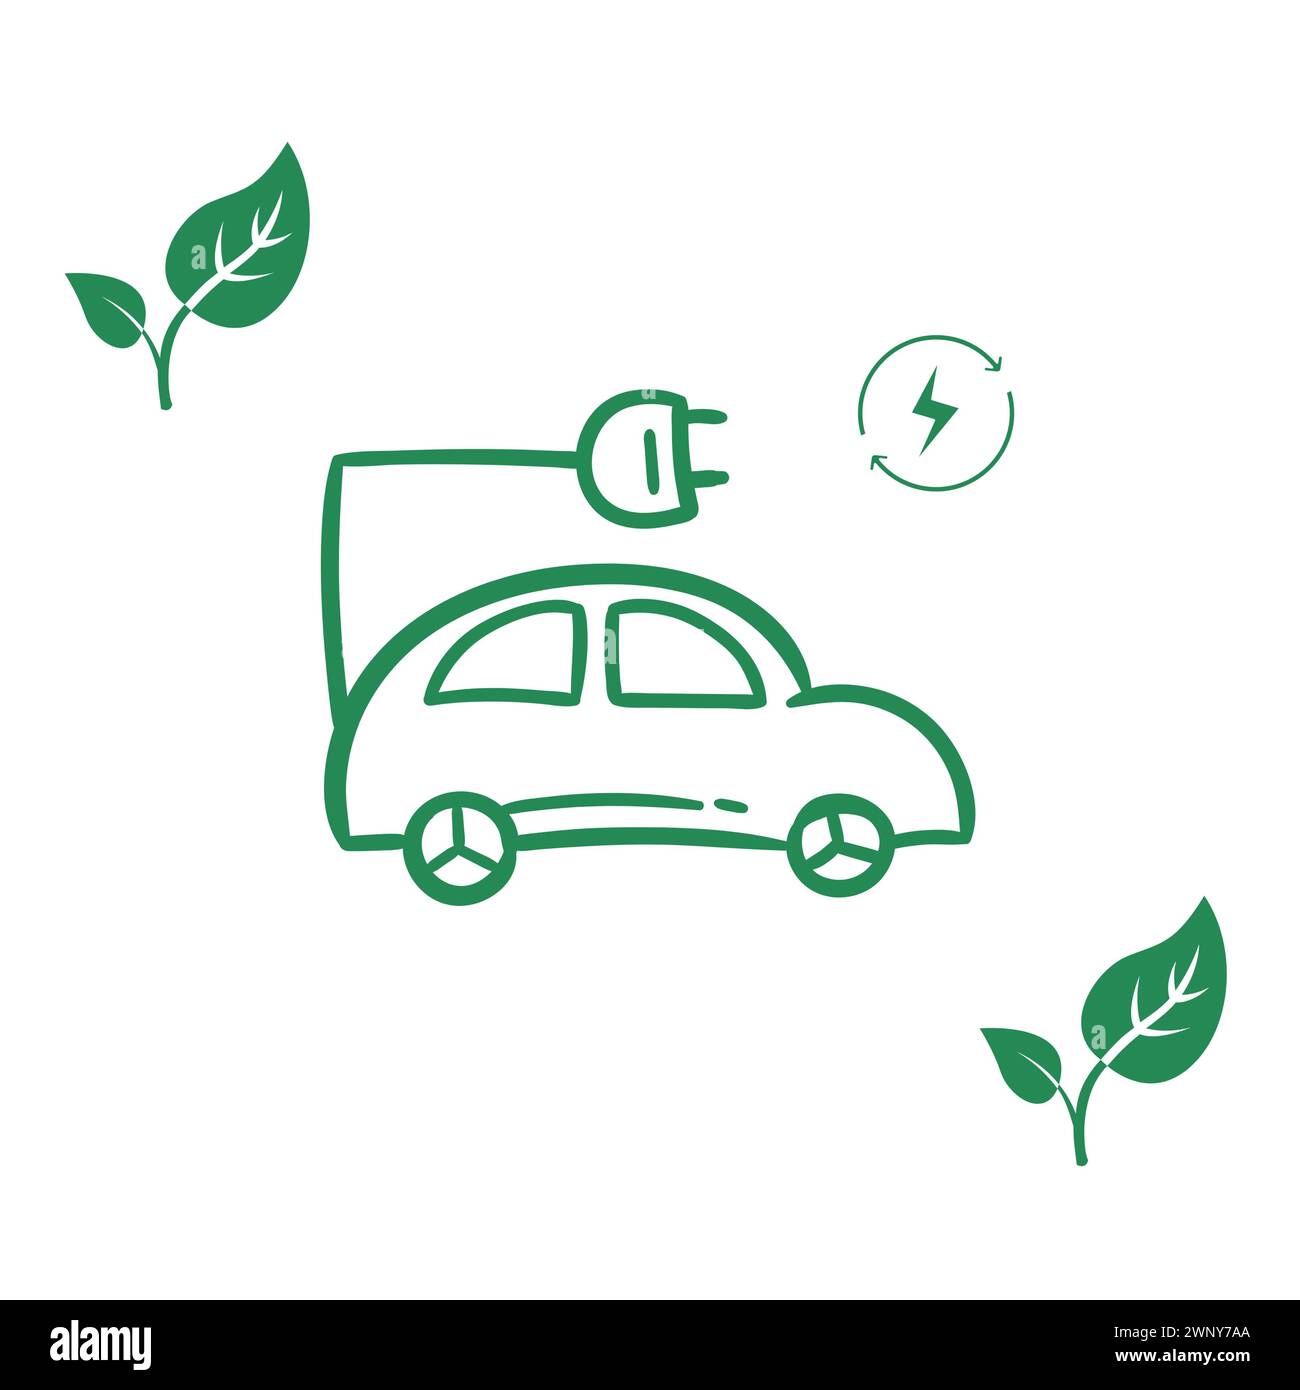 An electric car  on a white background, with green leaves to show its eco-friendliness and a charging sign showing the renewable nature of its fuel. Stock Vector